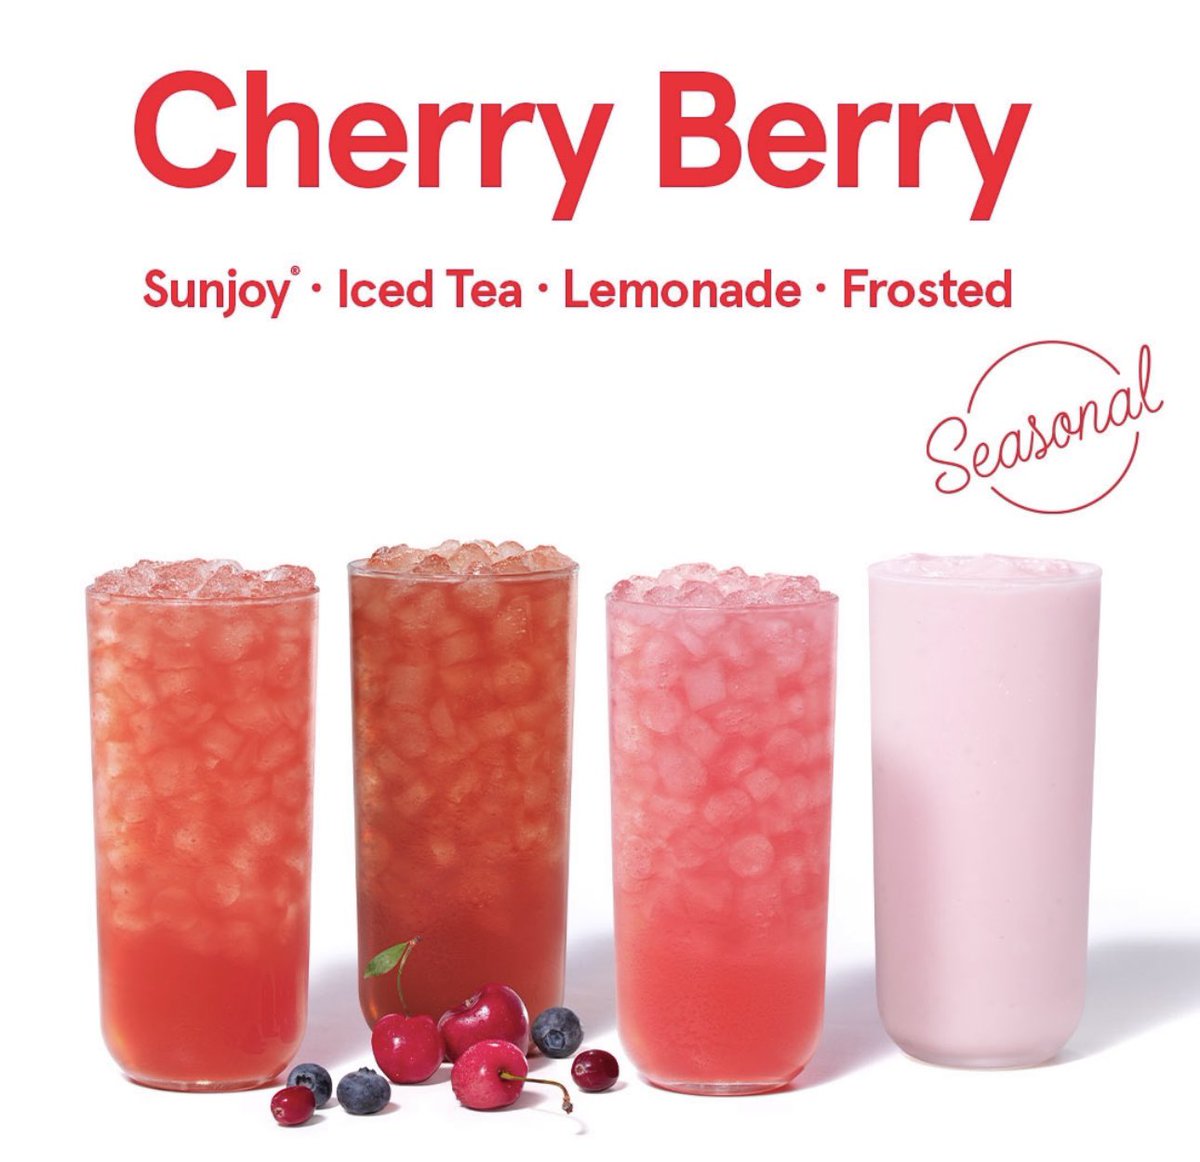 Sip into spring with our seasonal Cherry Berry beverage lineup 🍒 Which ones will you choose?